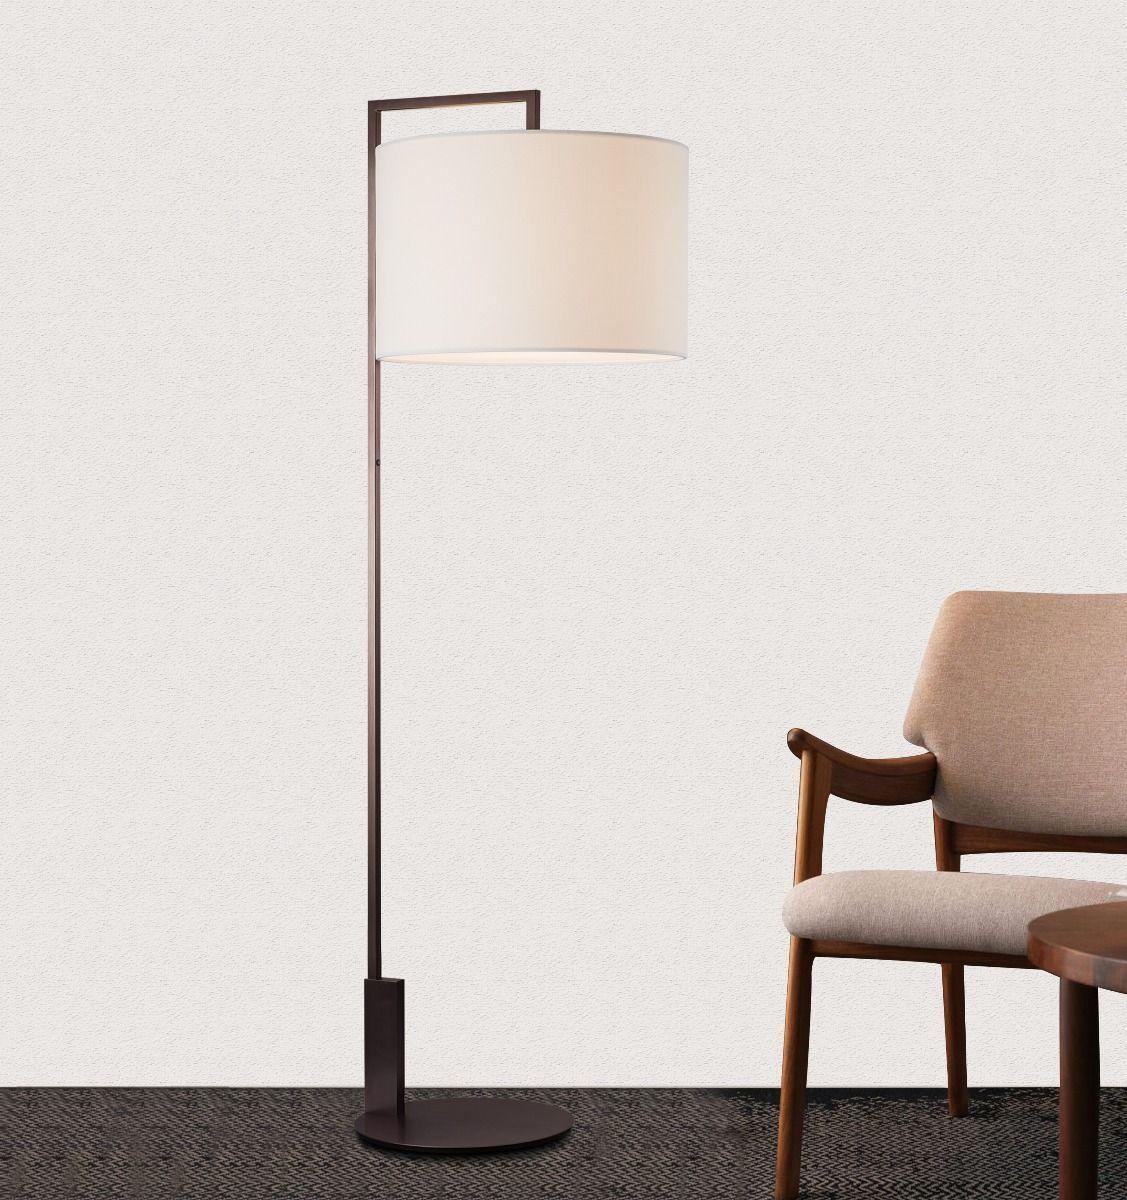 Pageone - Waldorf. Floor Lamp - Hbdepot